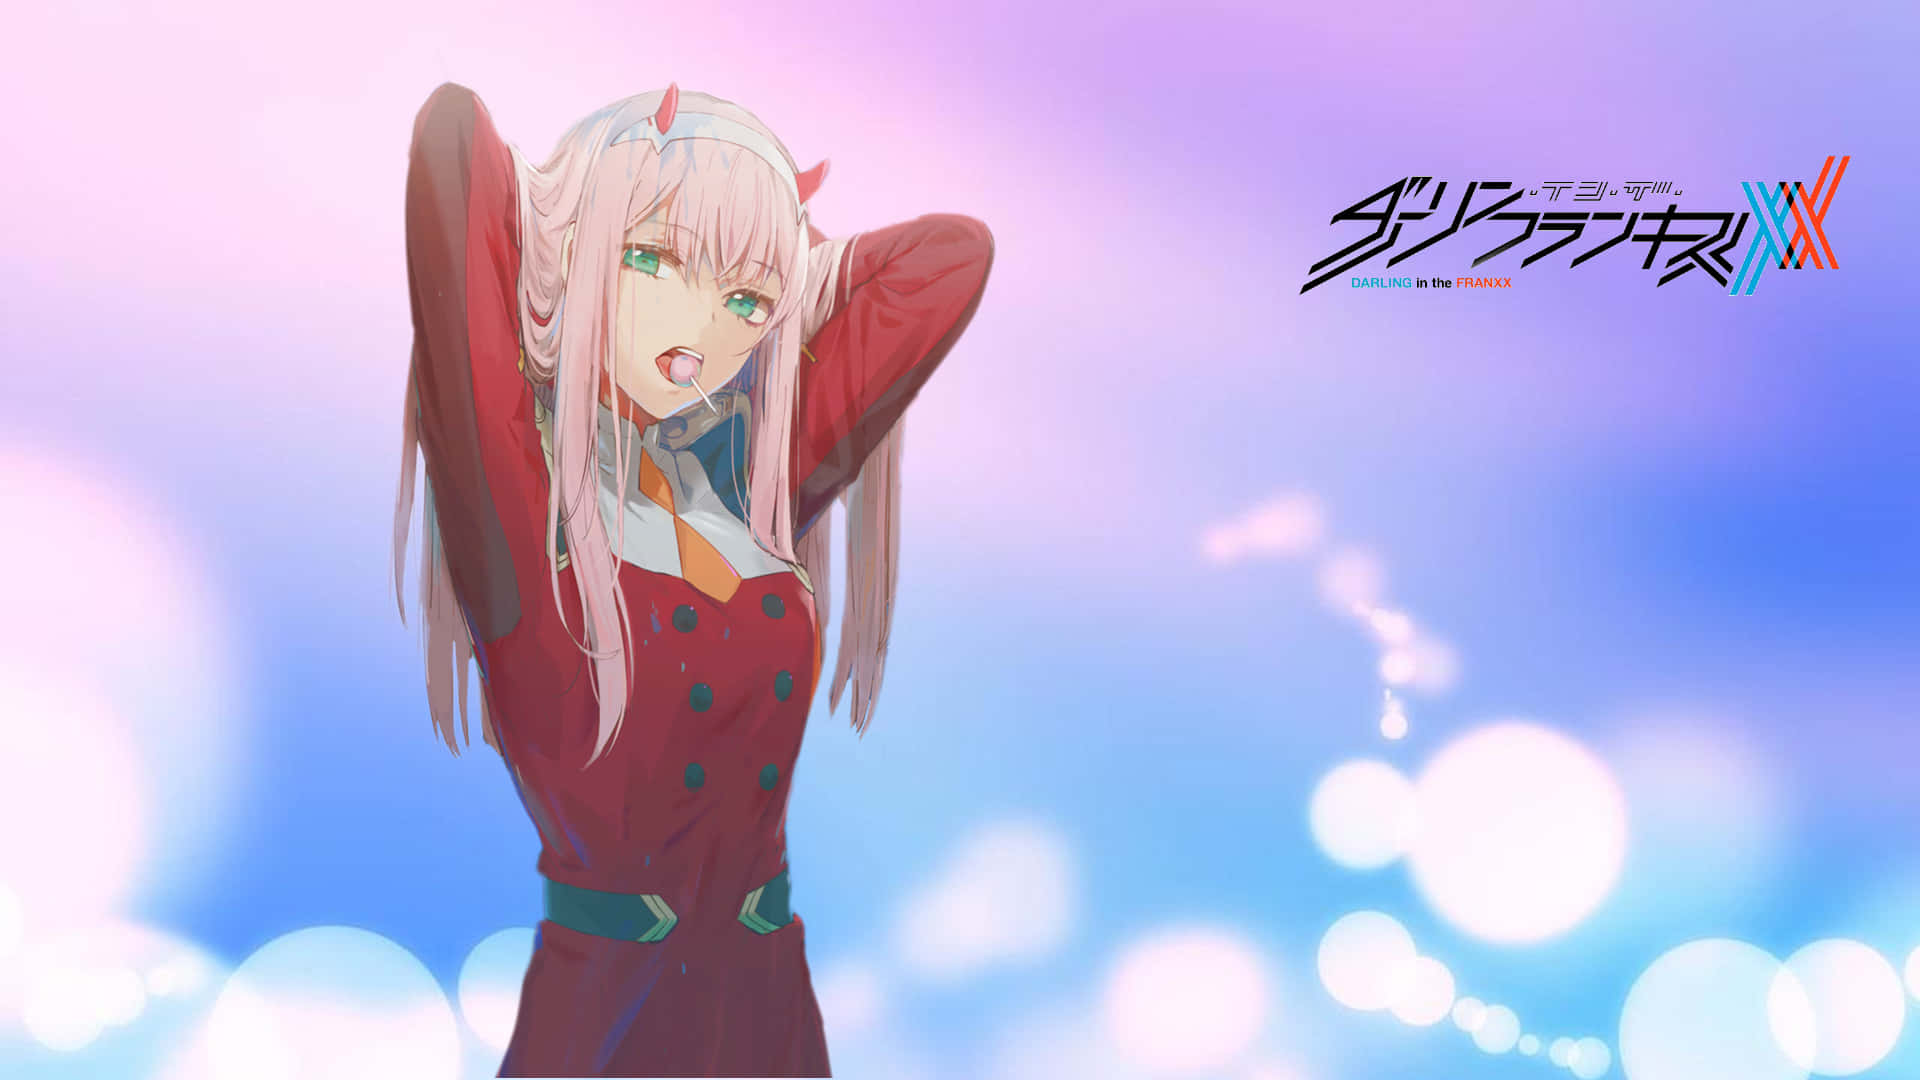 Join Zero Two, Hiro and the Darlings in the FranXX